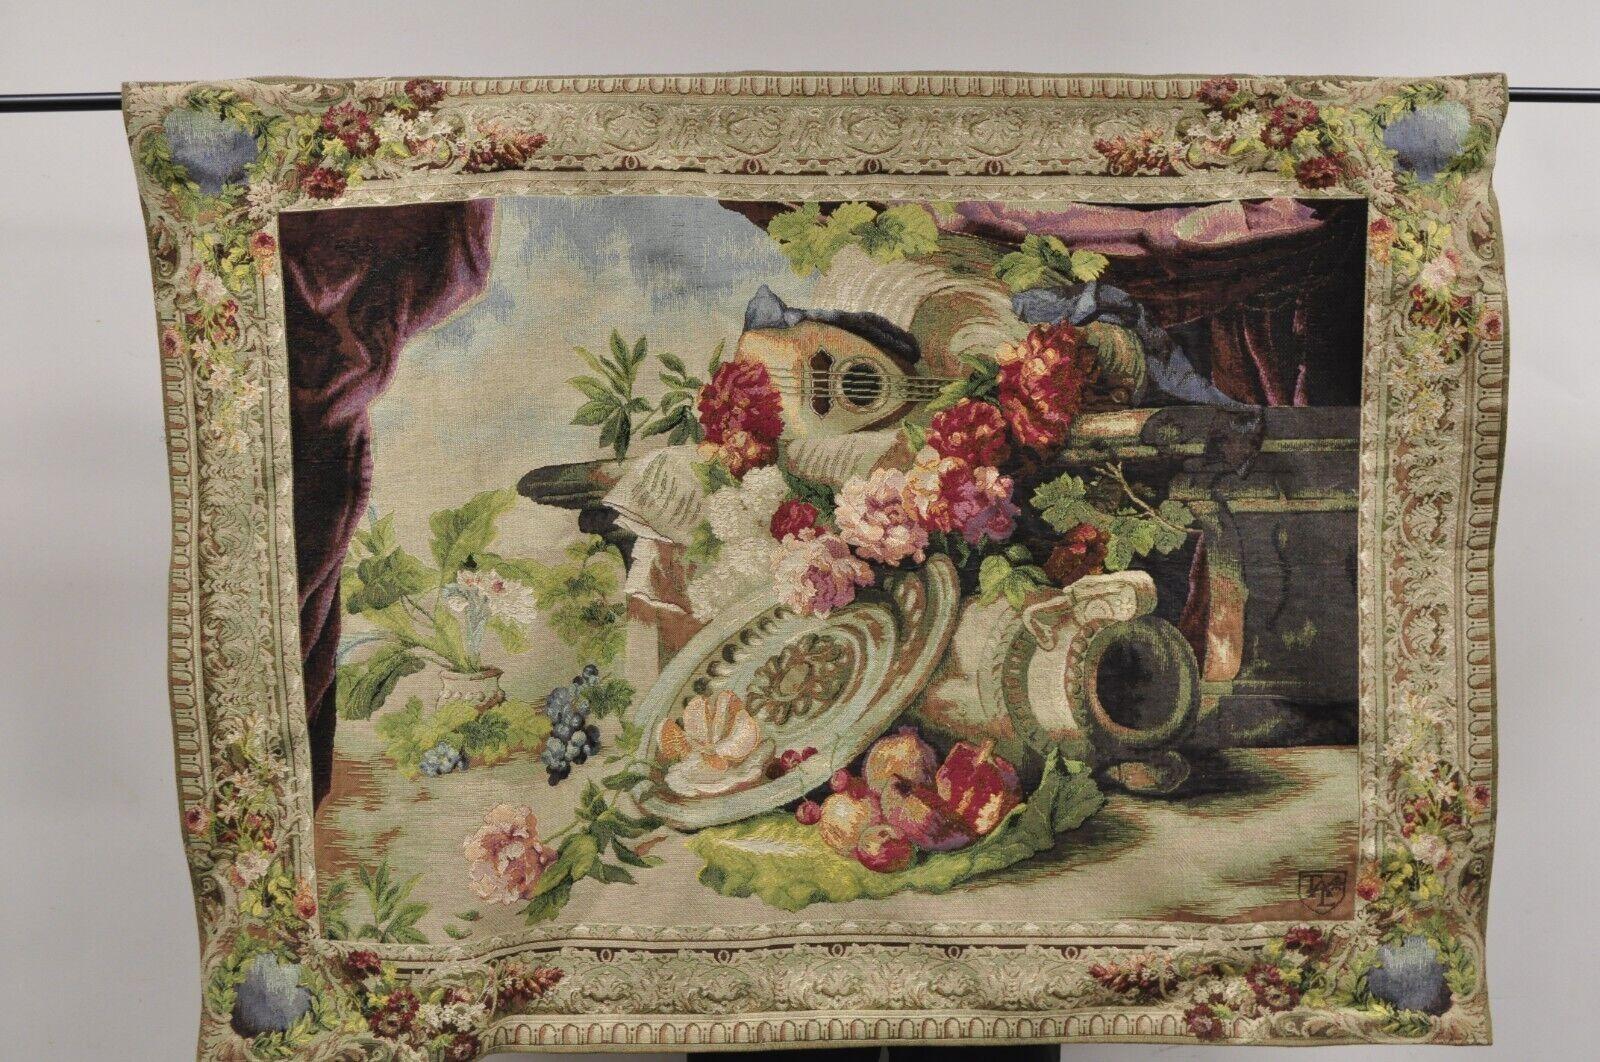 Jacquard Woven French Wall Tapestry Still Life Flowers & Mandolin by J&D. Item featured has an  Adjustable rod, ornate resin finials, very nice French style tapestry. Circa  21st Century, Pre-owned.
Measurements: 
Tapestry: 40